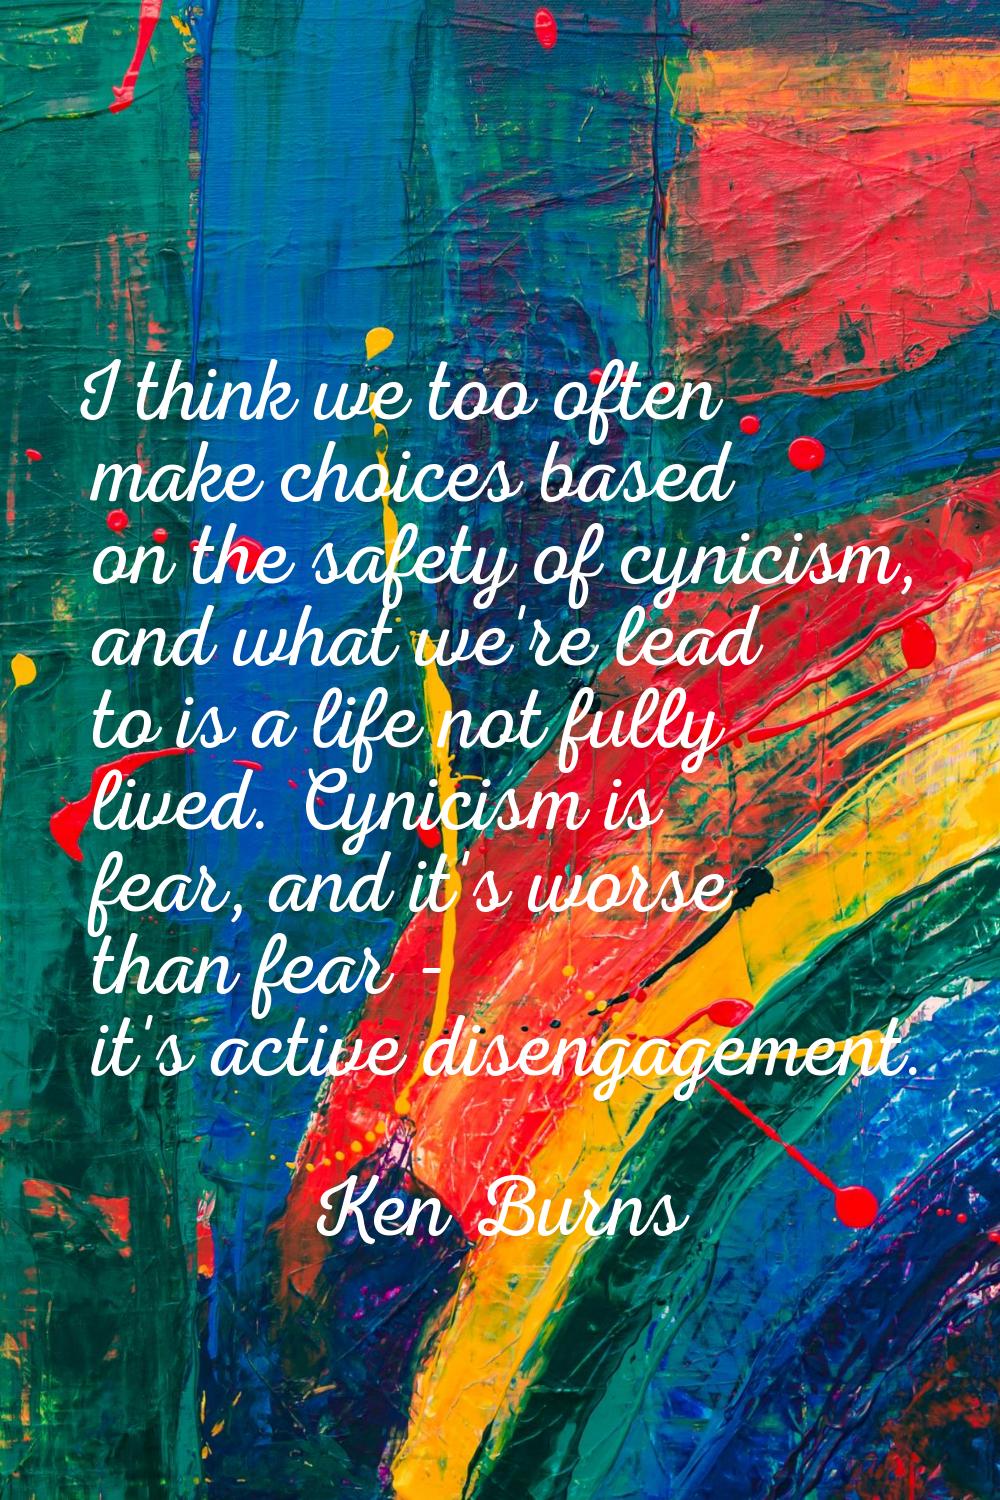 I think we too often make choices based on the safety of cynicism, and what we're lead to is a life